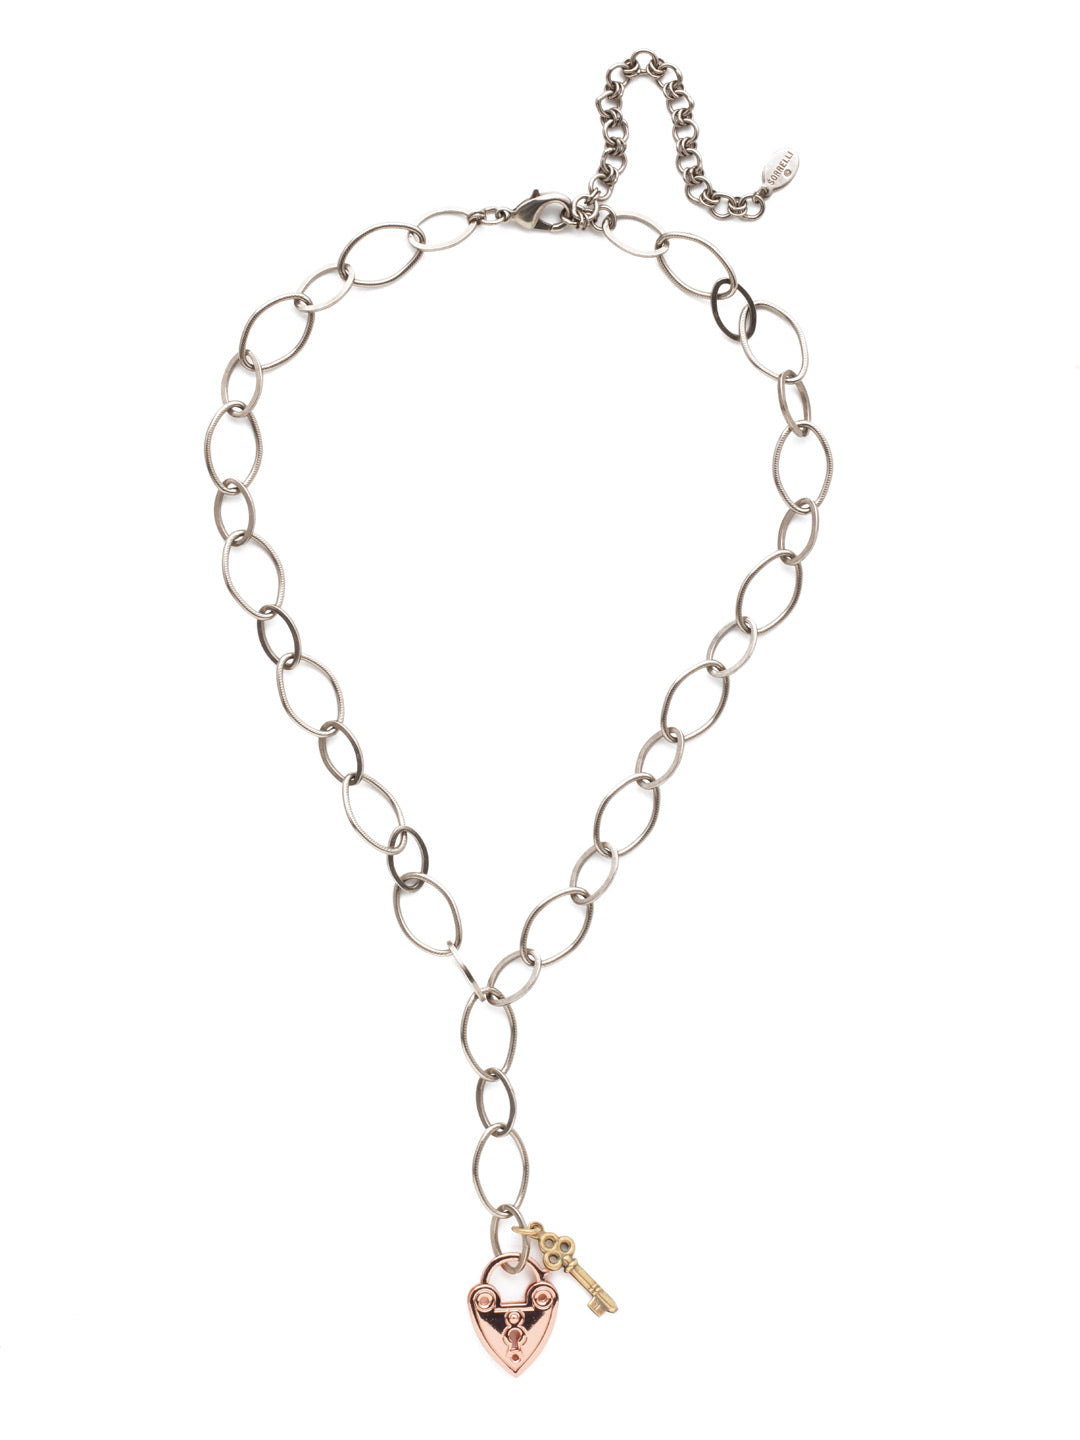 Eliza Pendant Necklace - 4NET9MXMTL - <p>Combine metal links and our lock and key charms and you get the Eliza Pendant Necklace. From Sorrelli's Bare Metallic collection in our Mixed Metal finish.</p>